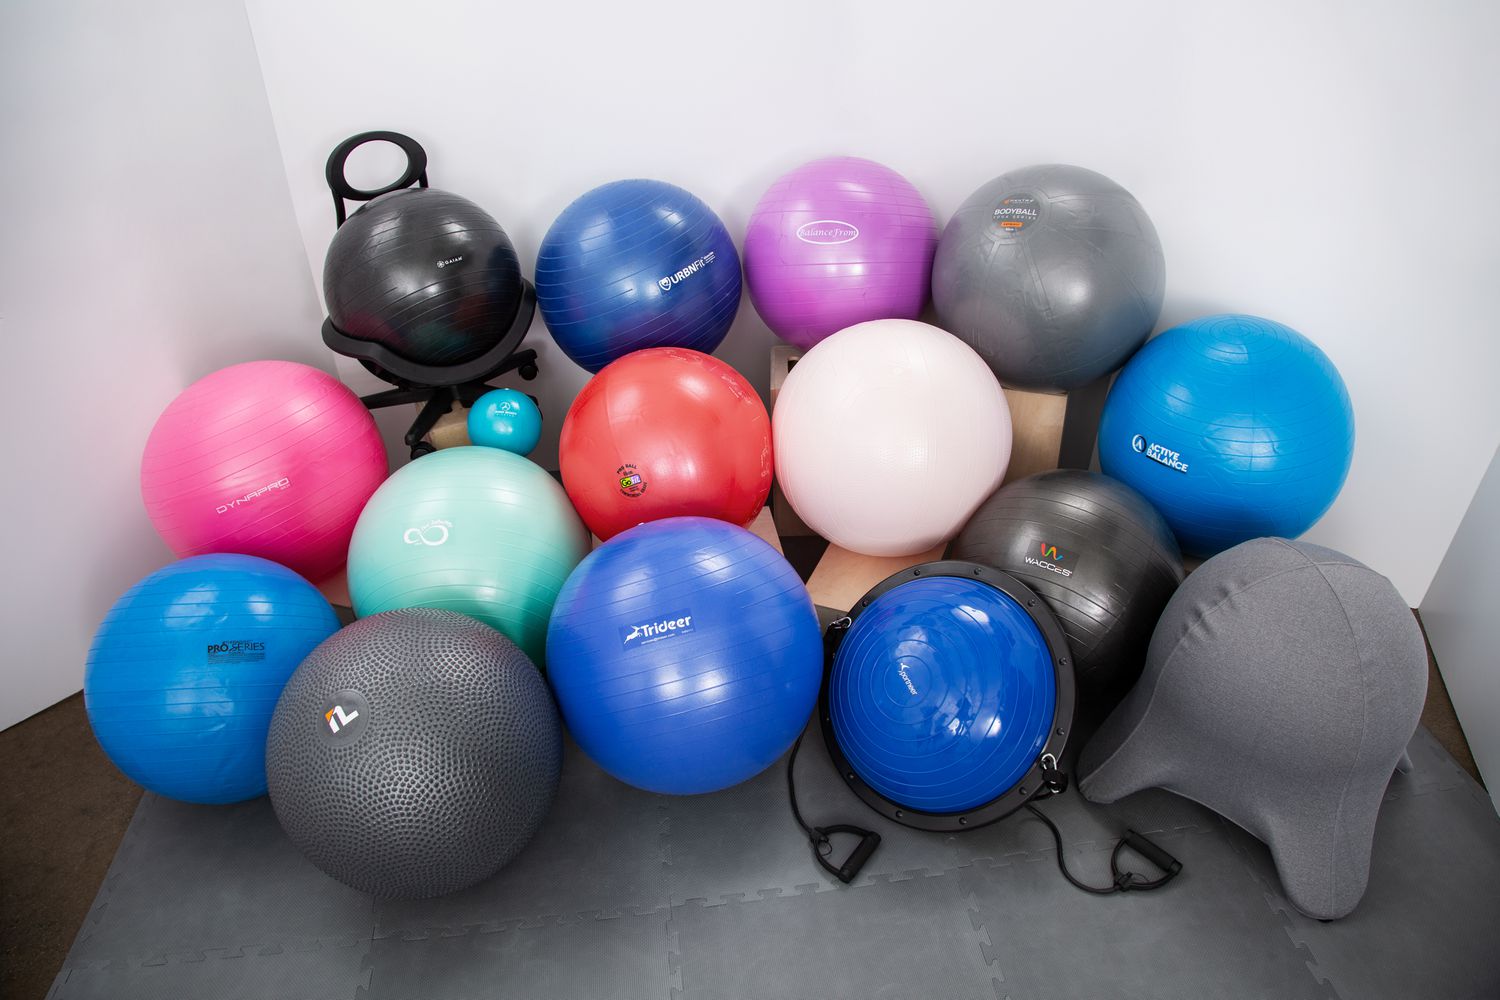 A selection of exercise balls we tested